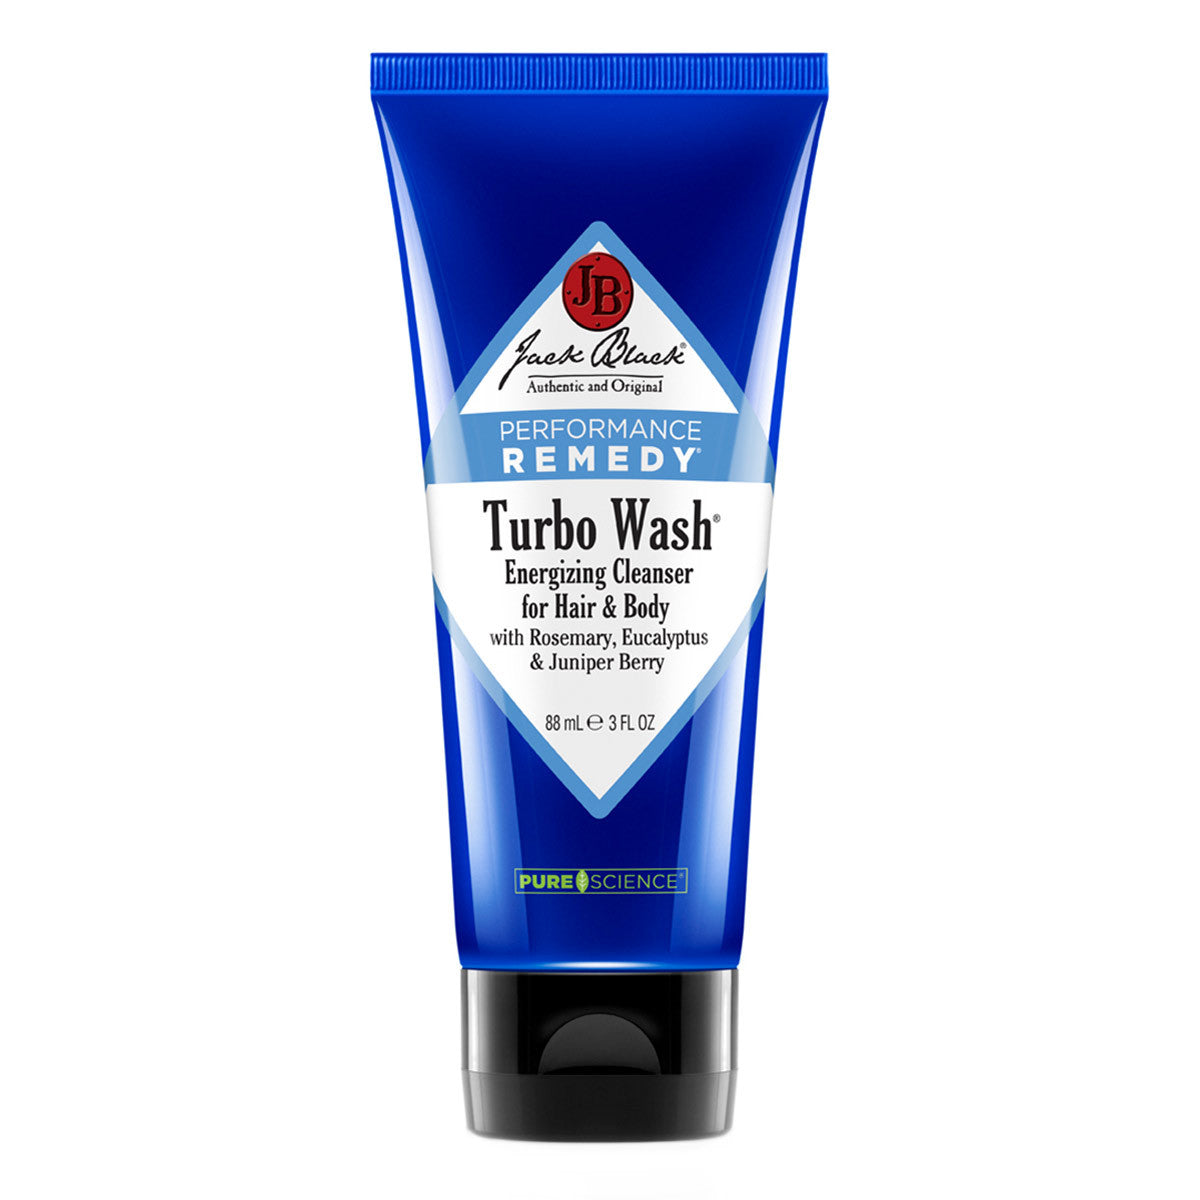 Primary image of Turbo Wash Energizing Hair + Body Cleanser